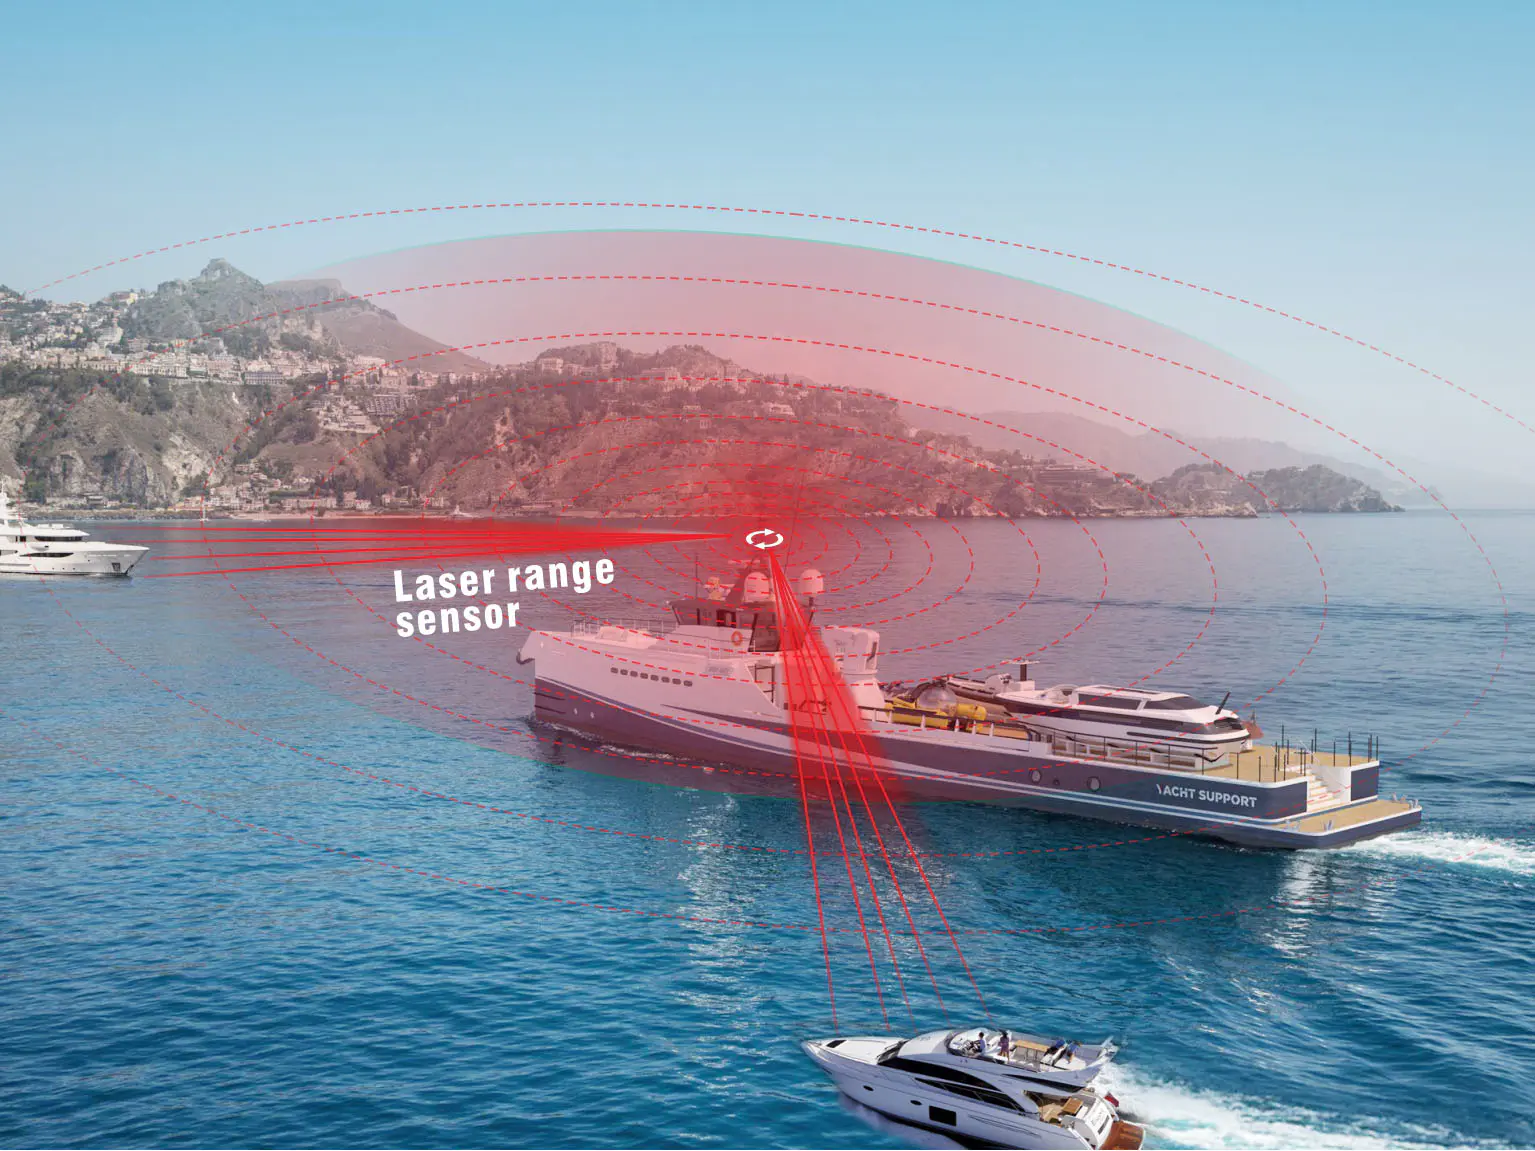 Ship navigation and landing safety and security